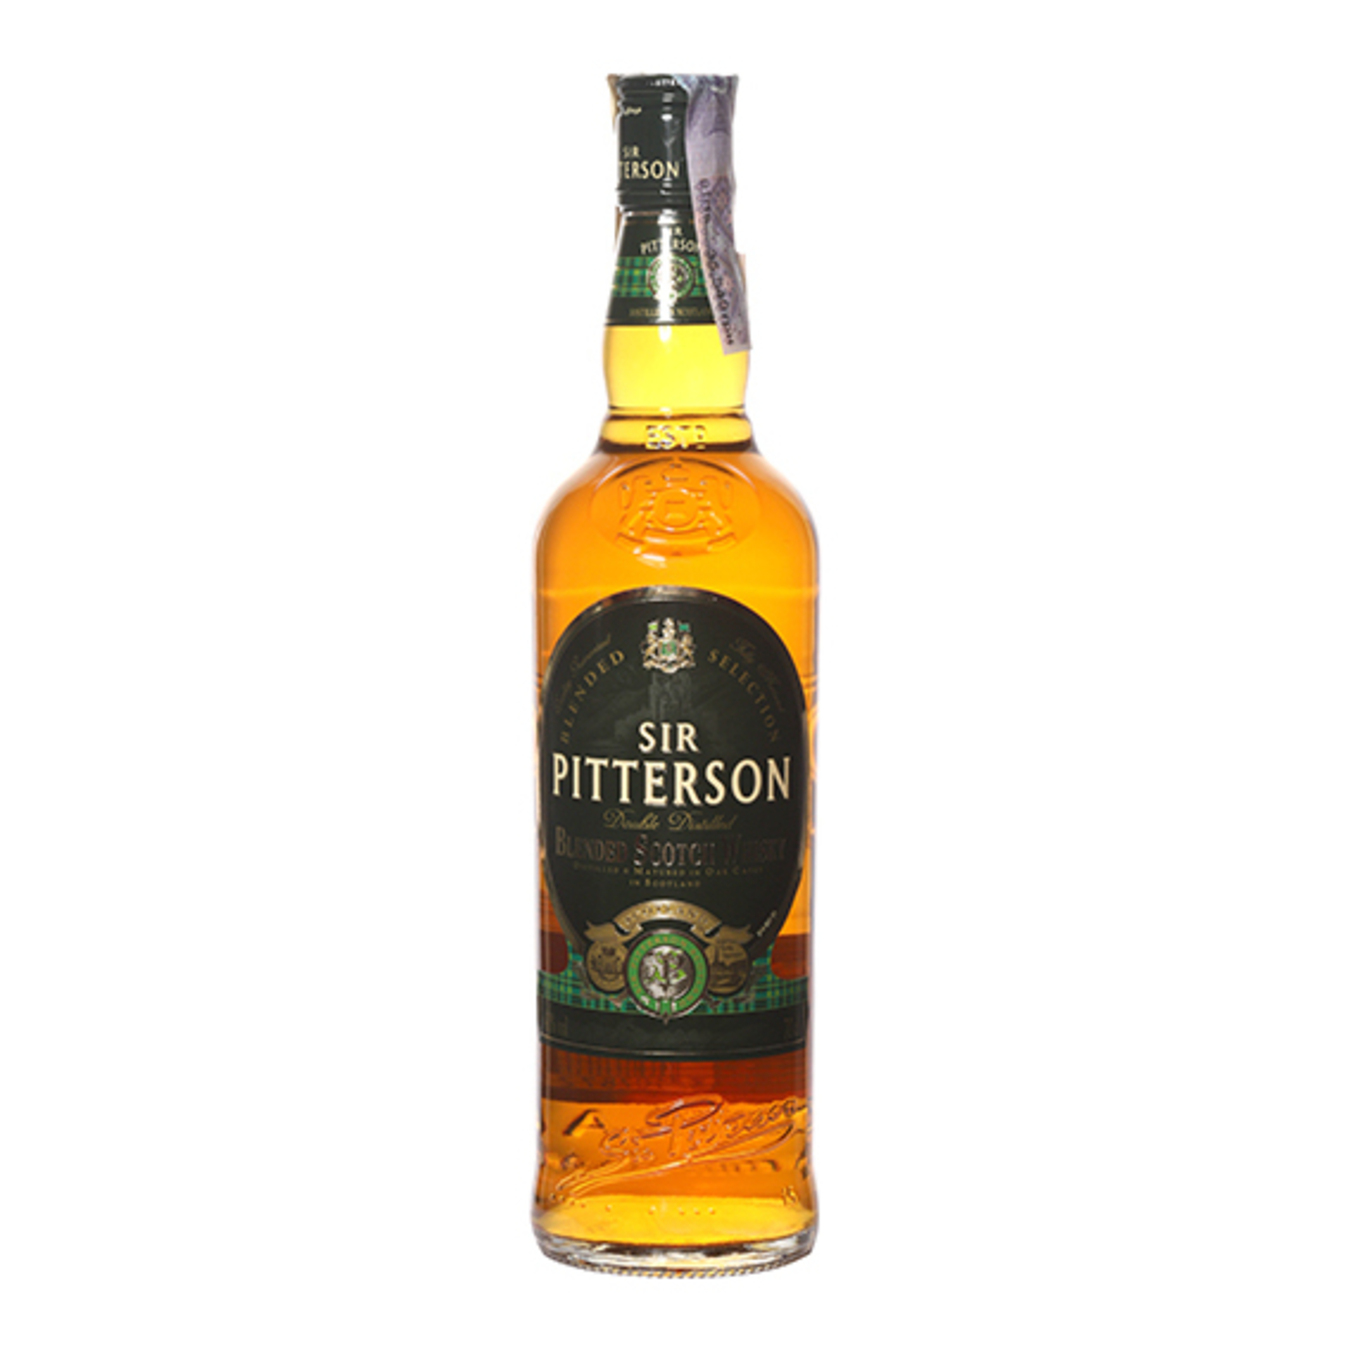 Sir Pitterson whisky 40% 0,7l